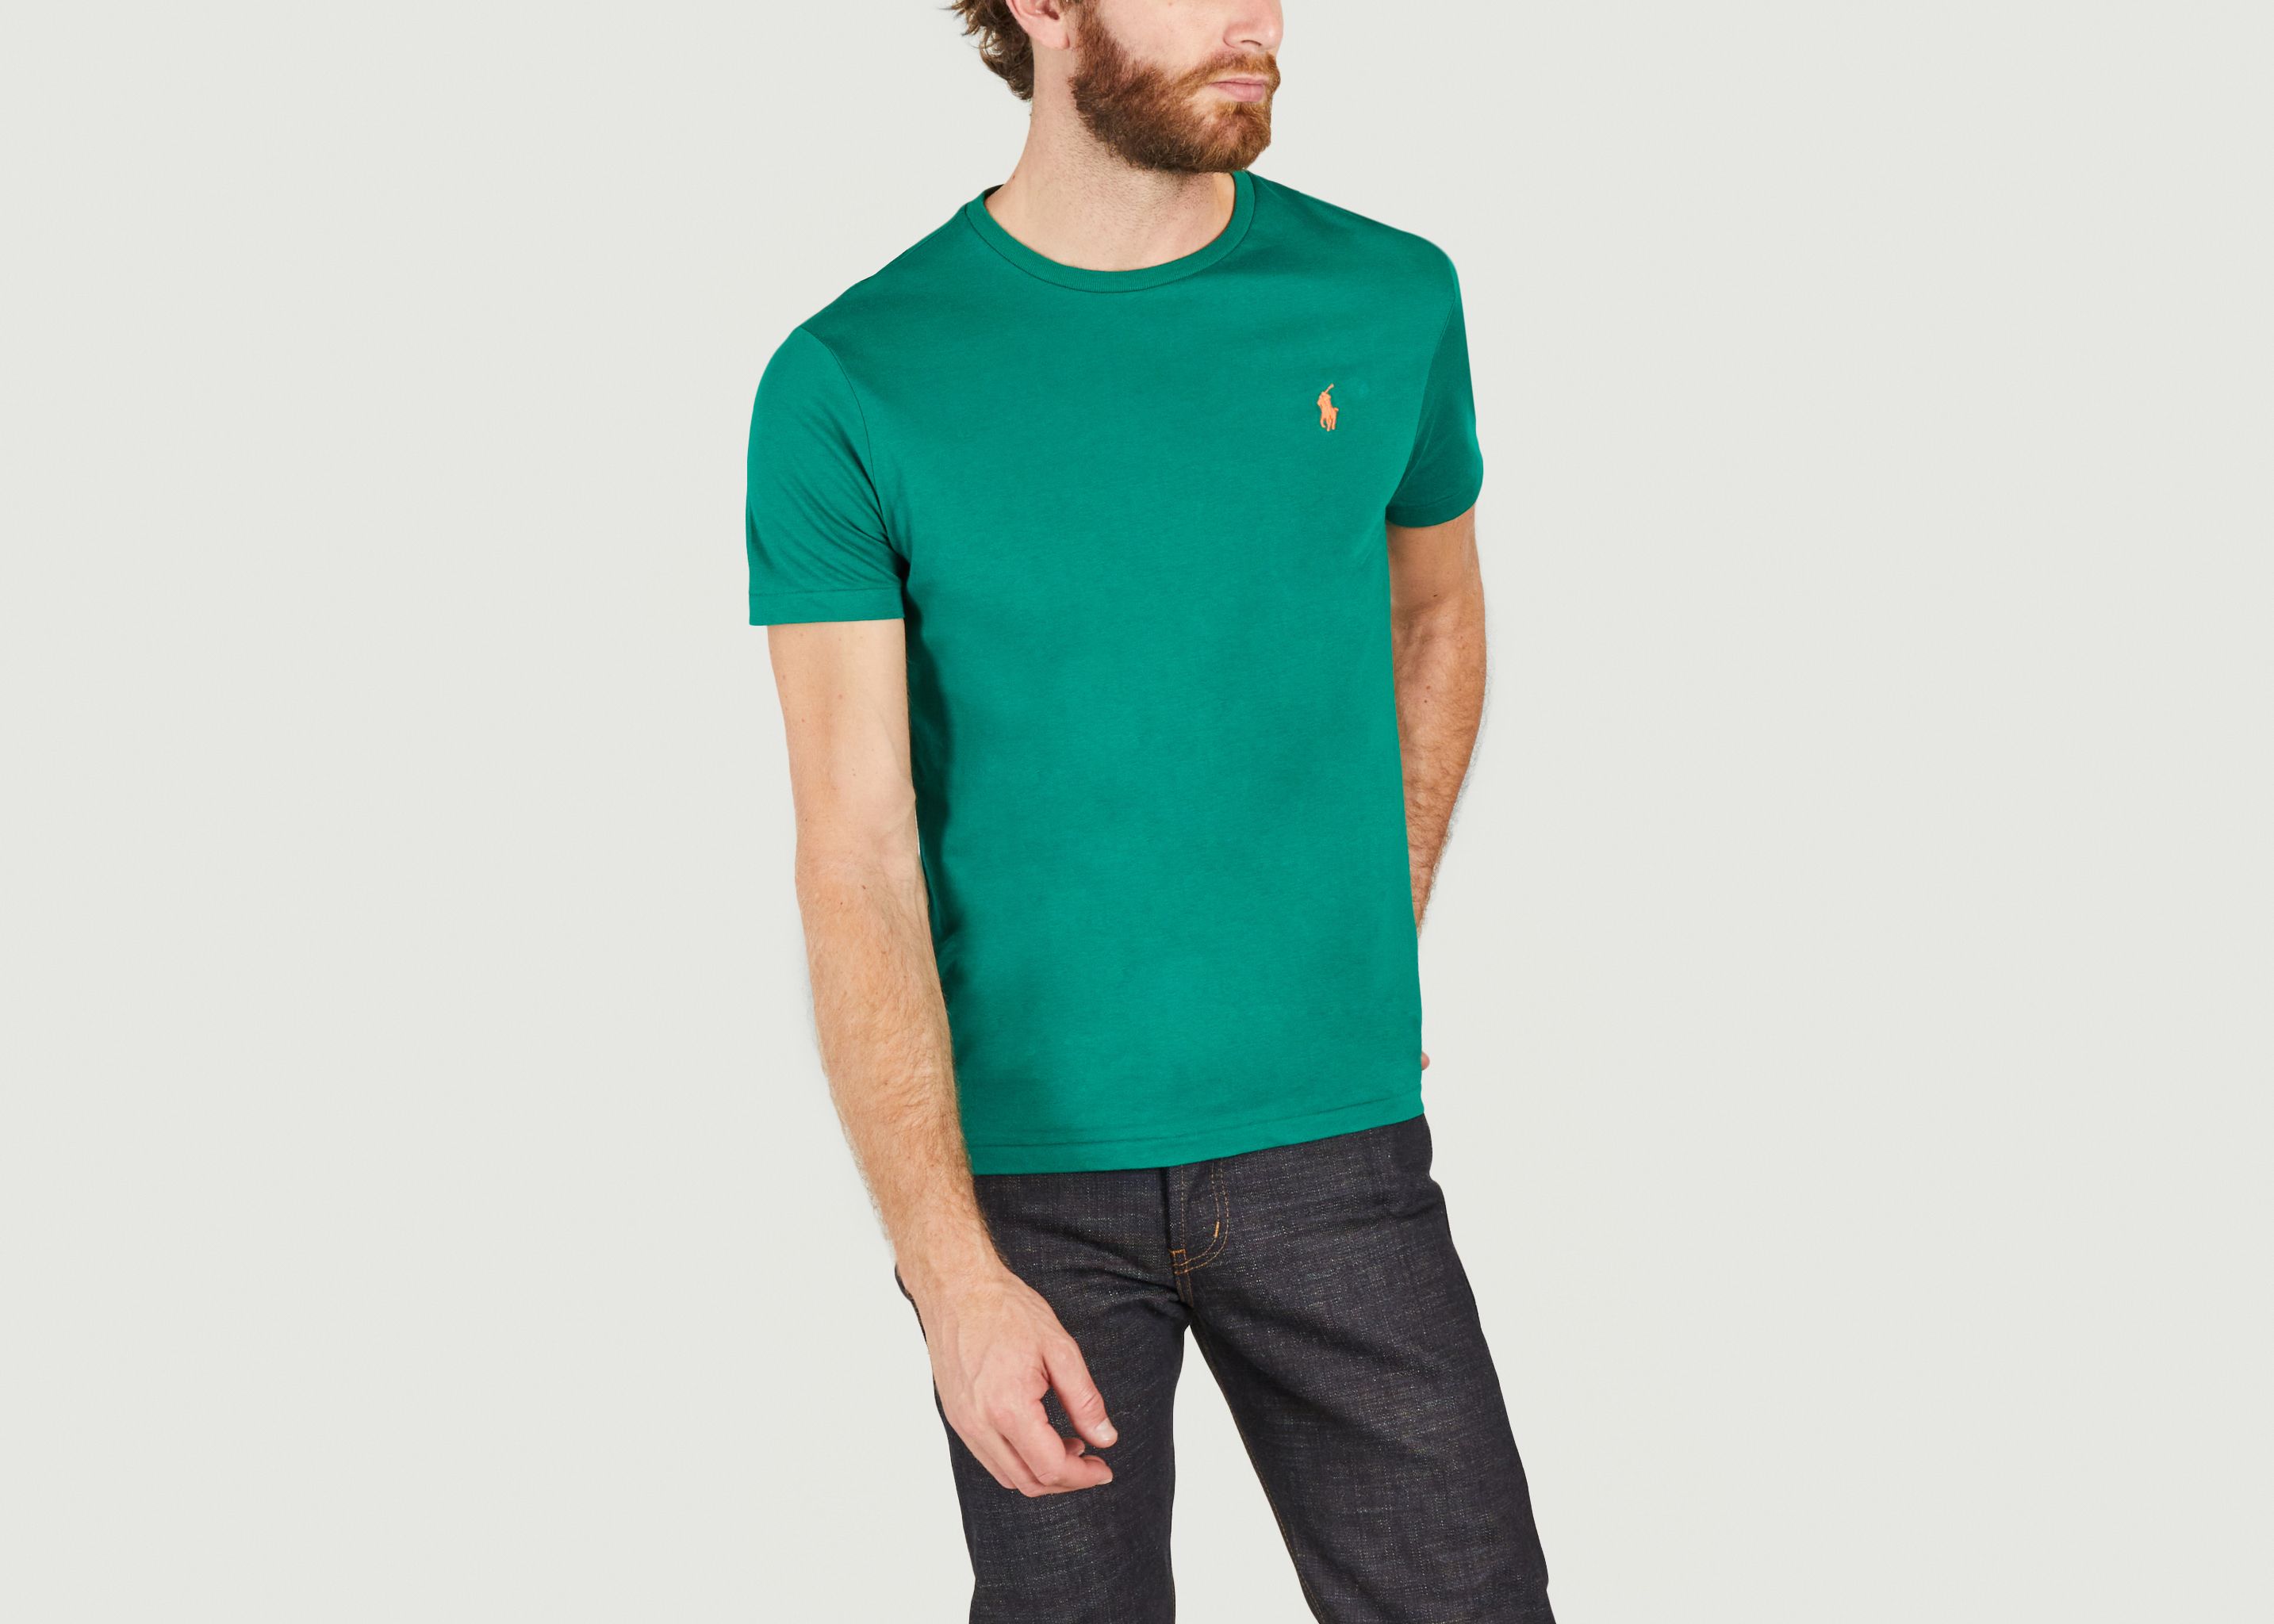 Fitted jersey T-shirt with round neck - Polo Ralph Lauren